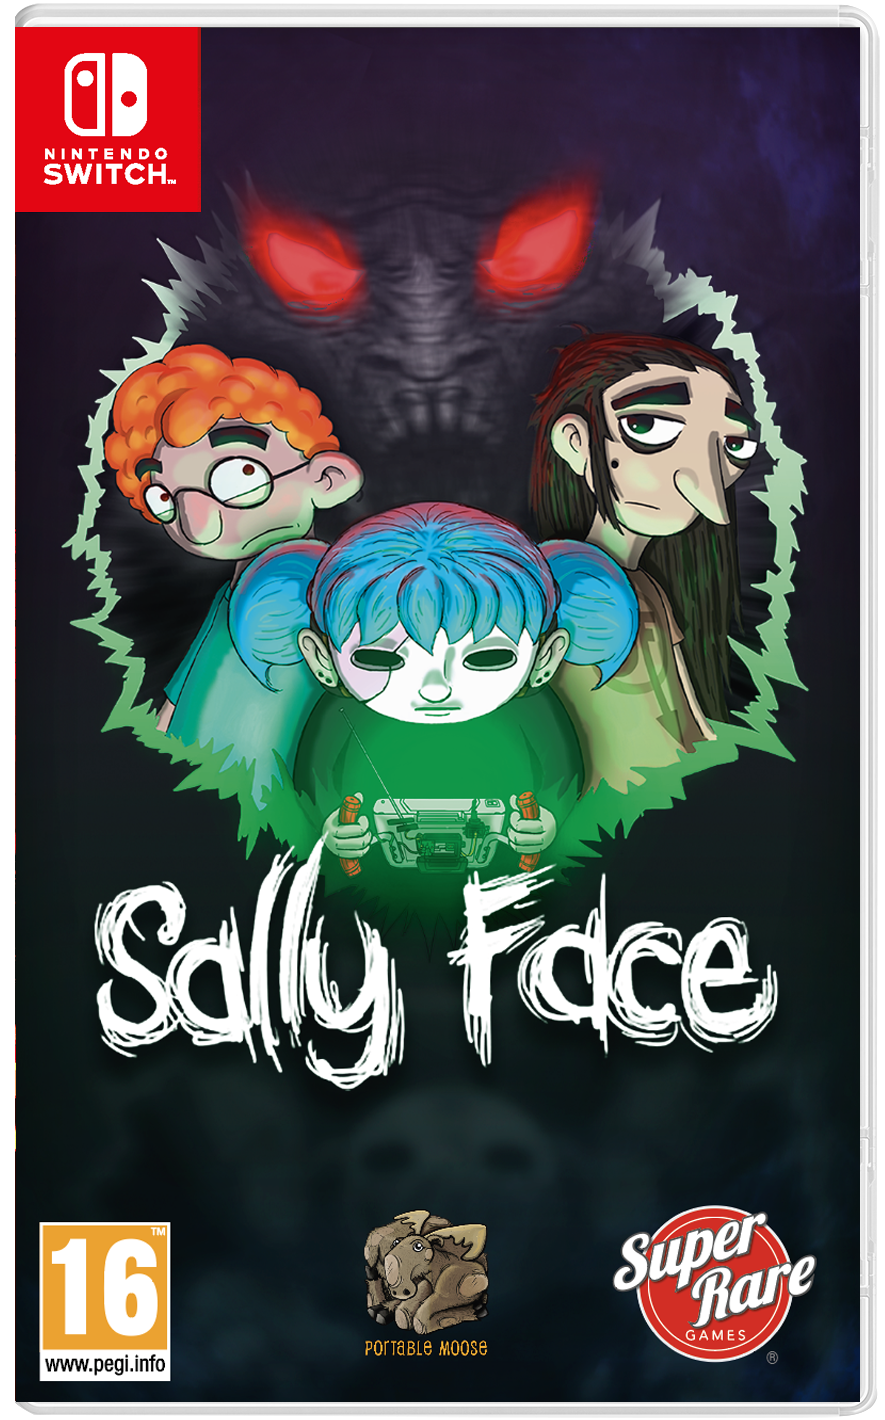 SRG#65: Sally Face (Switch)